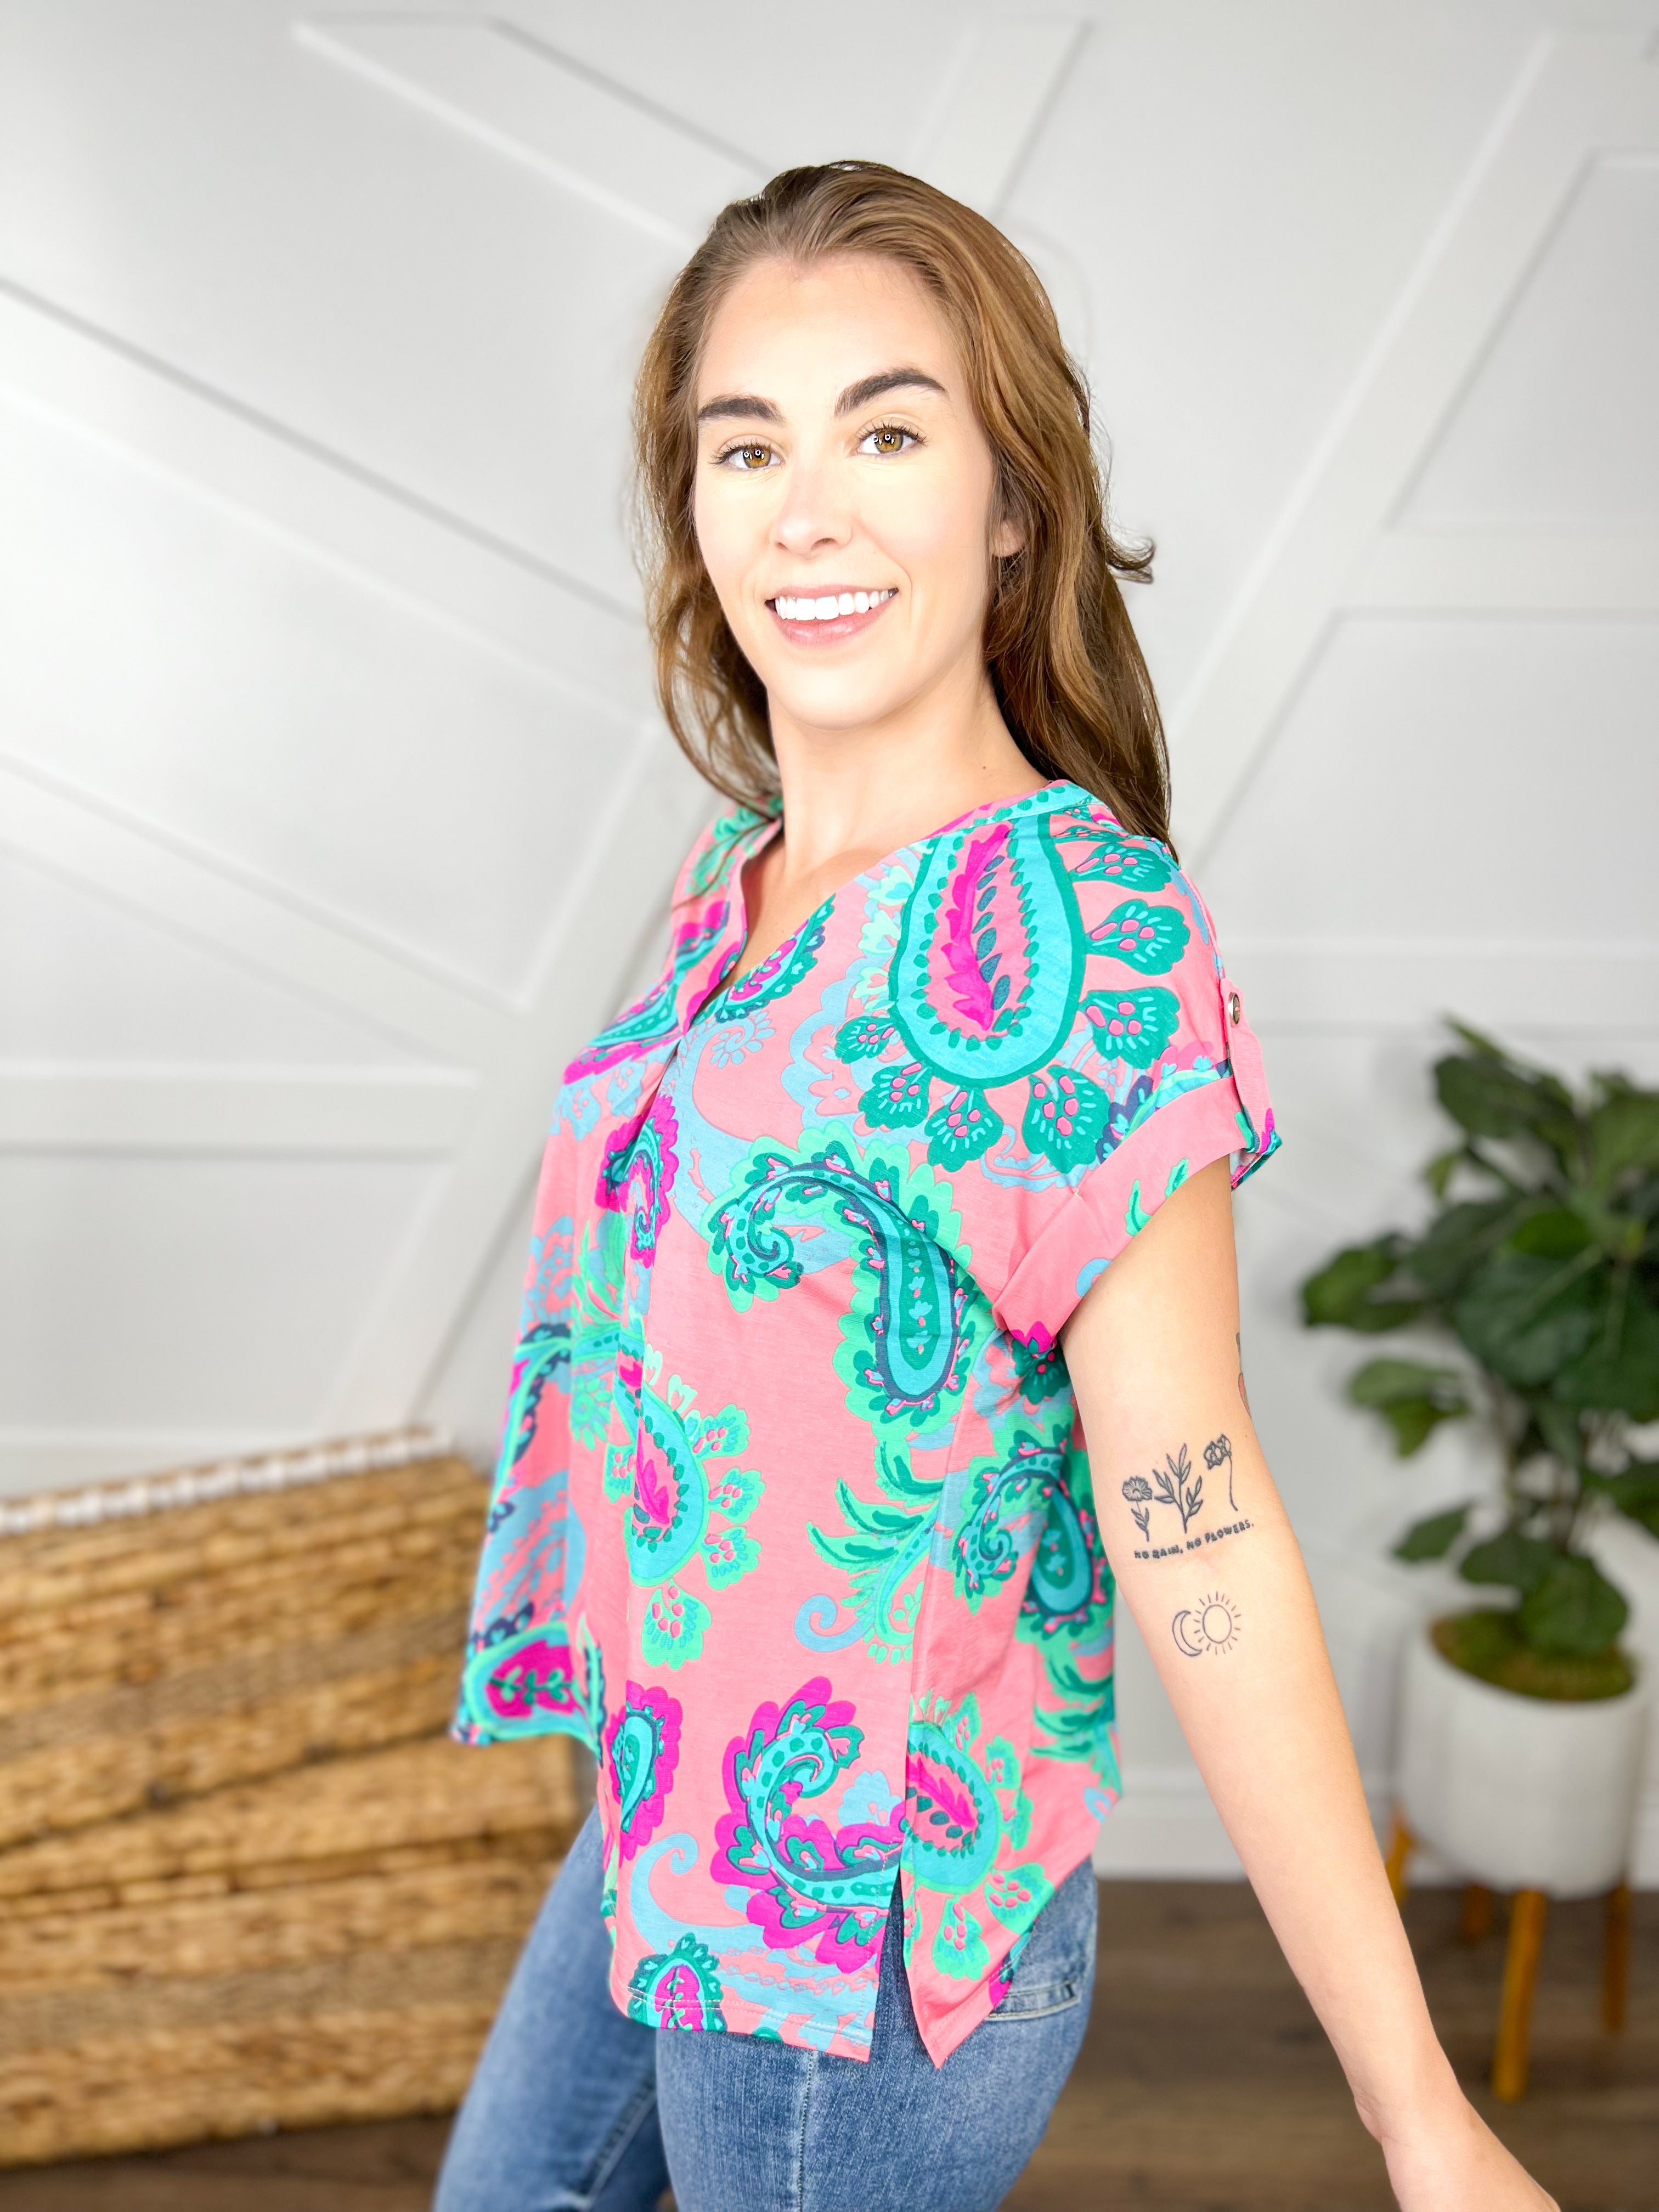 Out Loud Top-110 Short Sleeve Top-DEAR SCARLETT-Heathered Boho Boutique, Women's Fashion and Accessories in Palmetto, FL